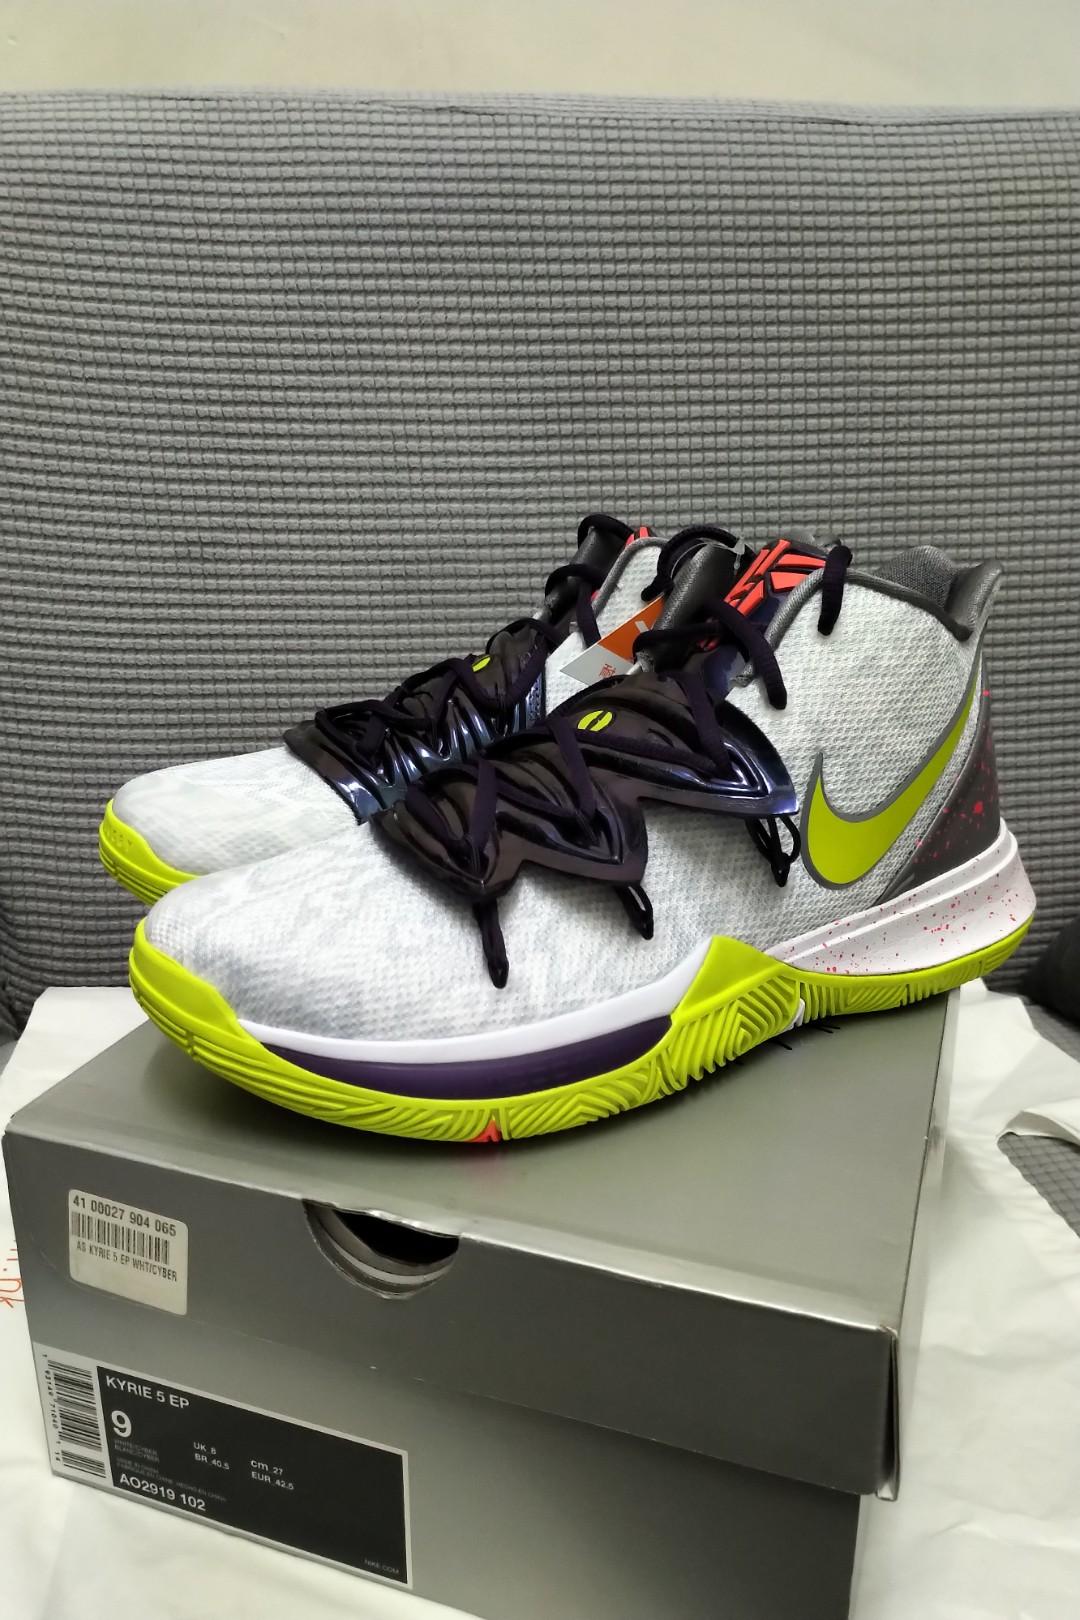 UNBOXING Nike Kyrie 5 Black Gold Metallic unboxing